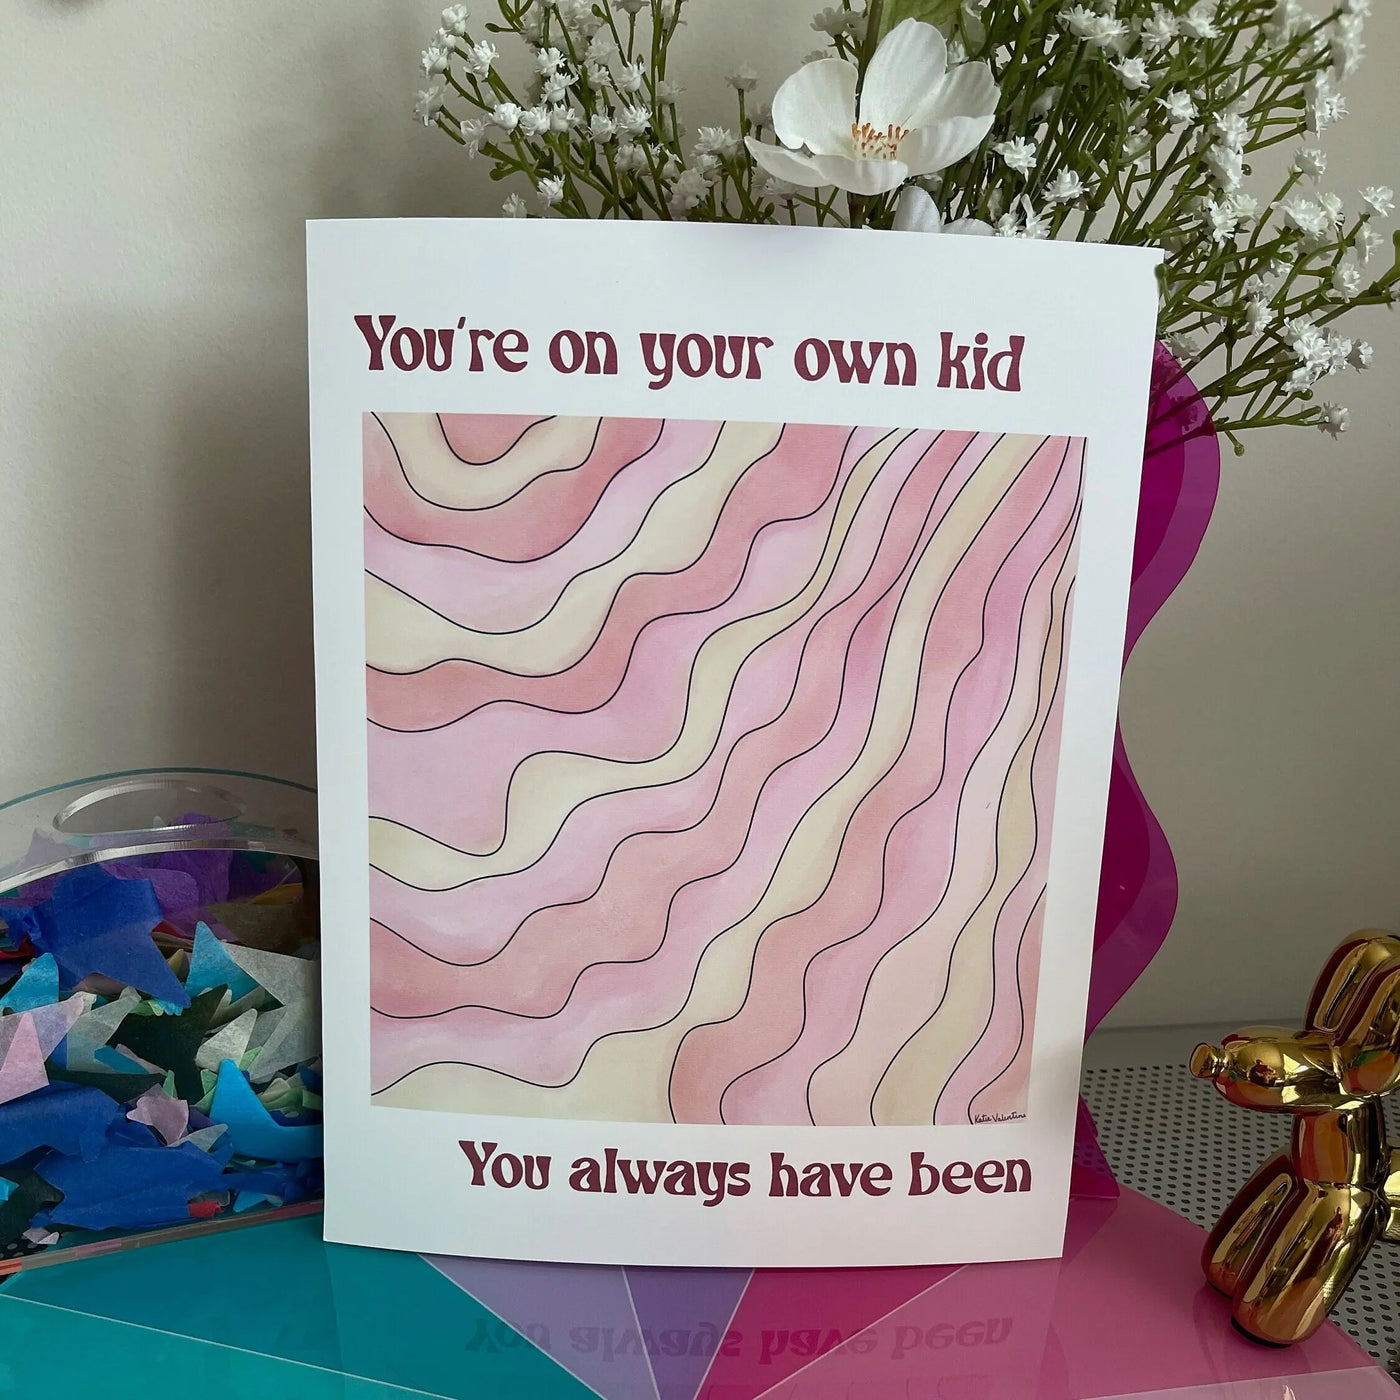 You're on Your Own Kid art print MangoIllustrated